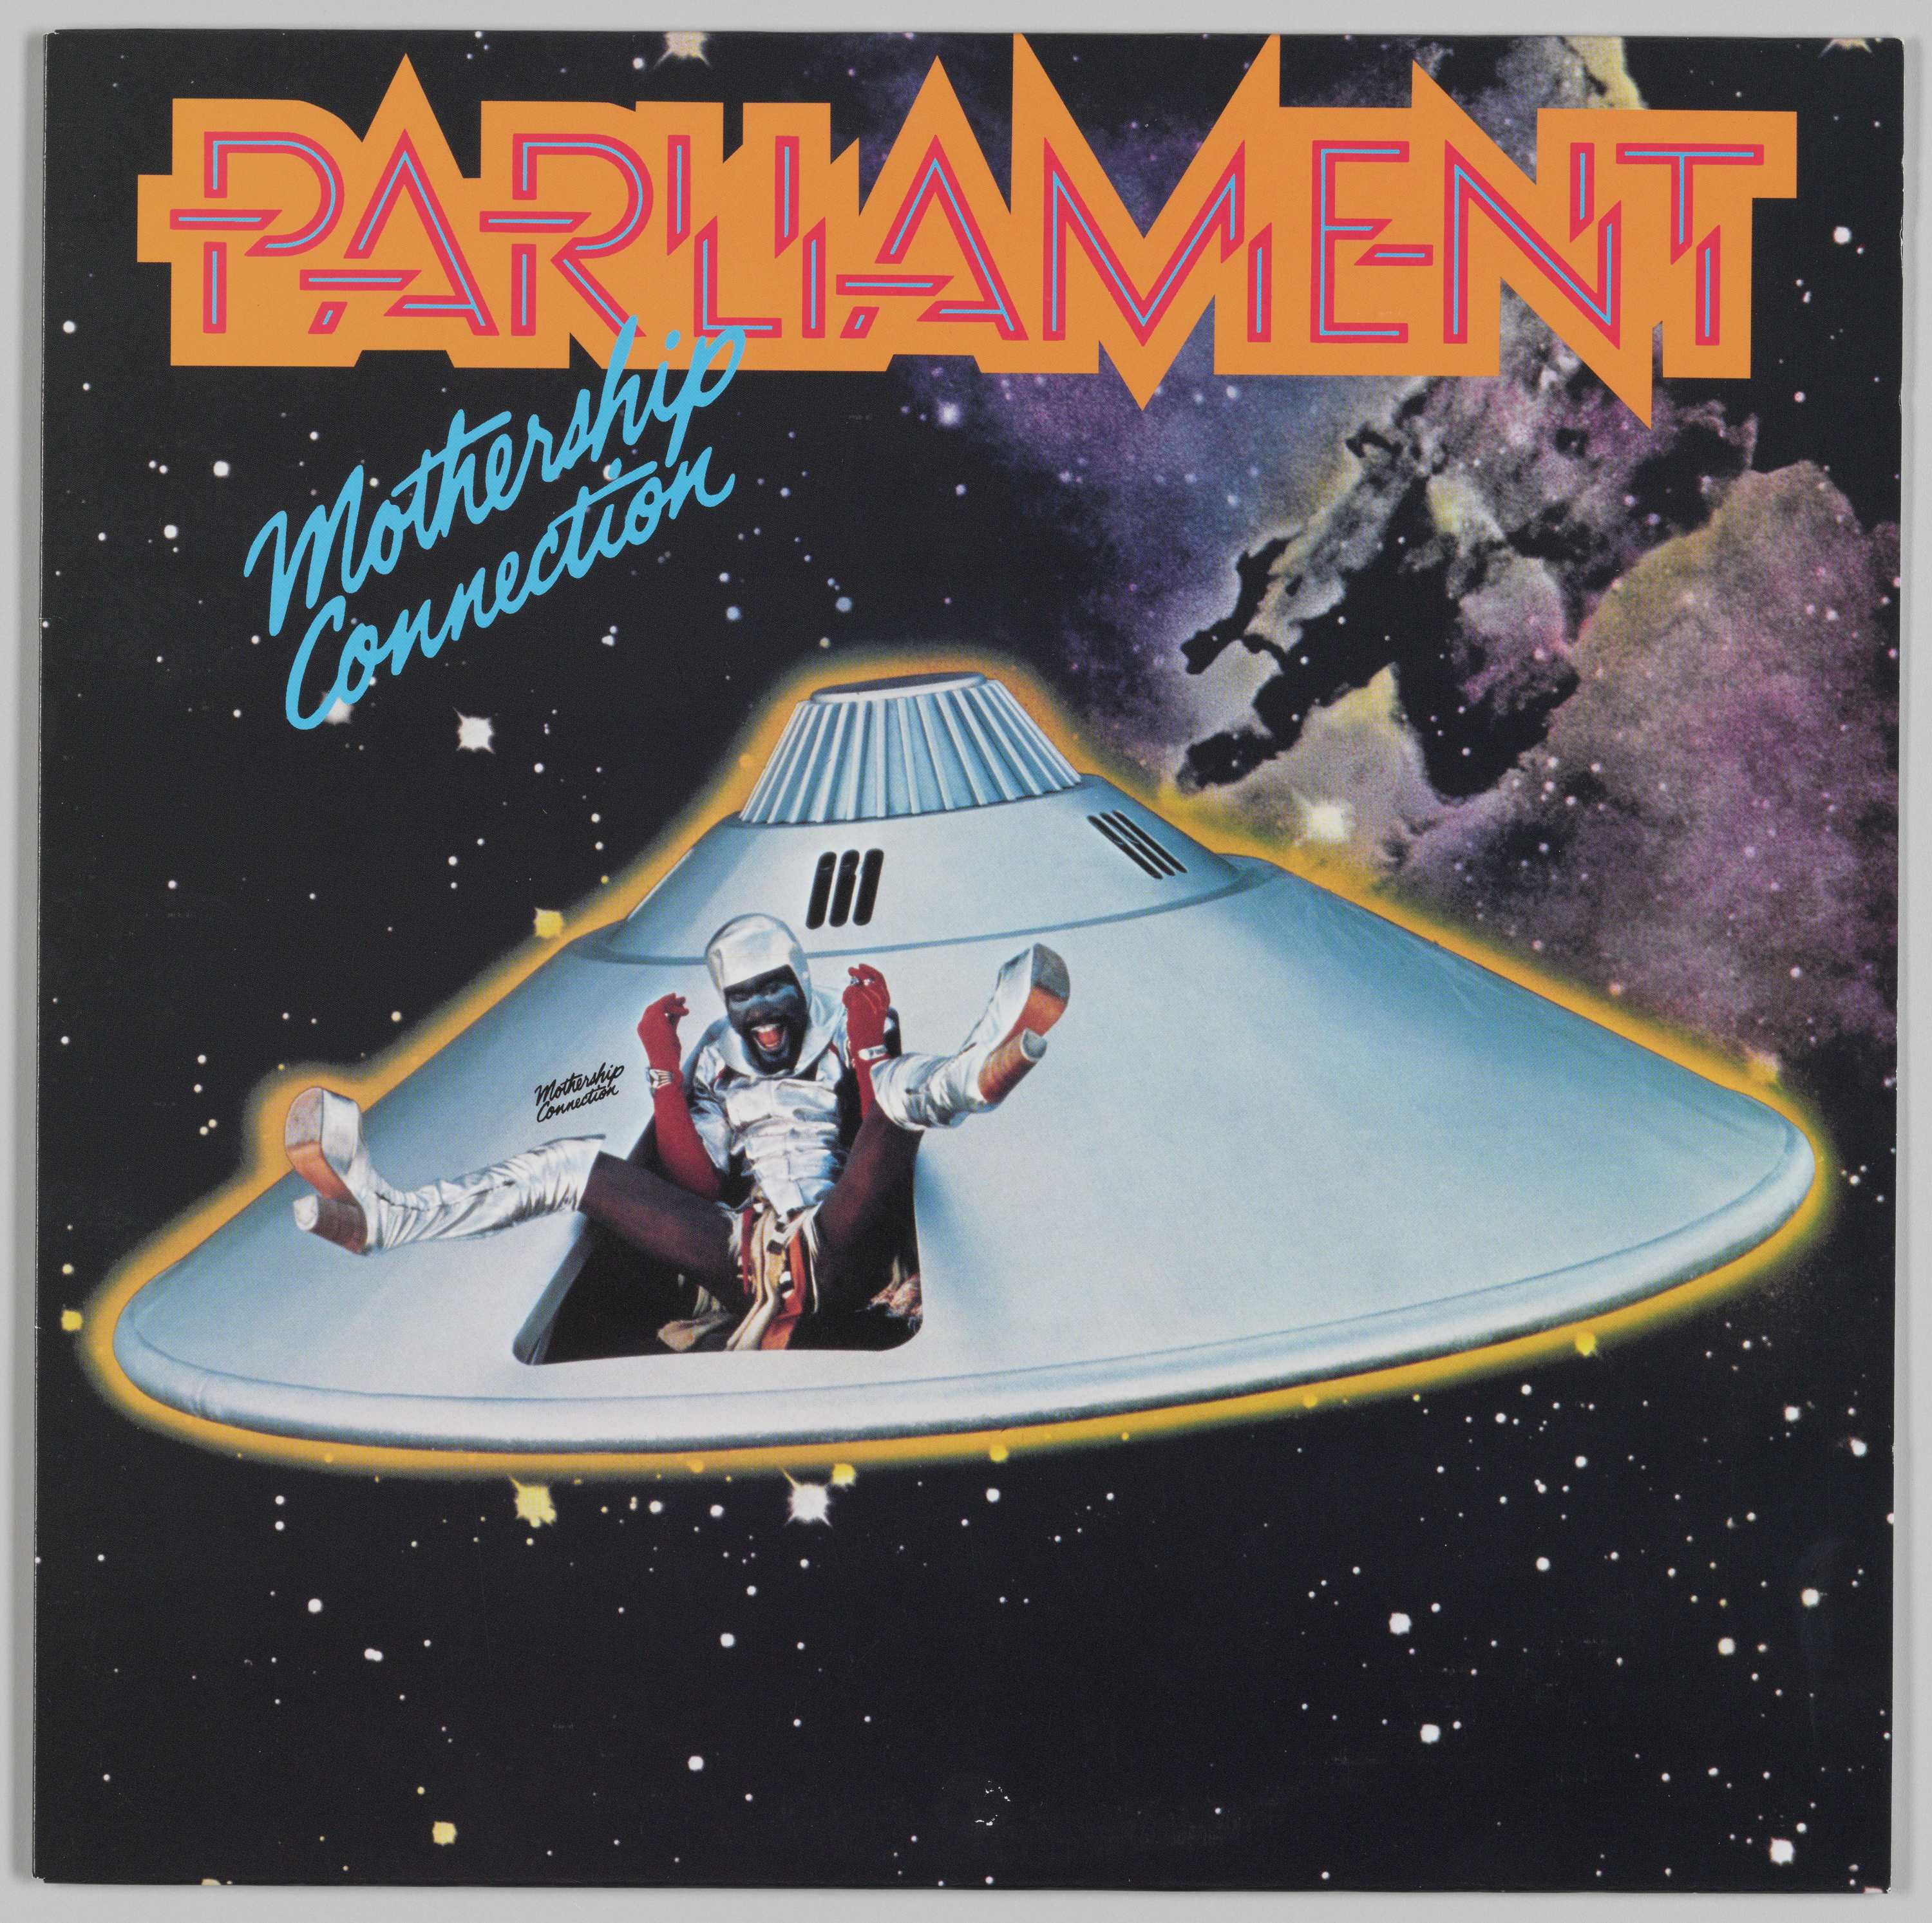 At the top of the cover, Parliament is in yellow and pink font over a galaxy, above a UFO space ship.